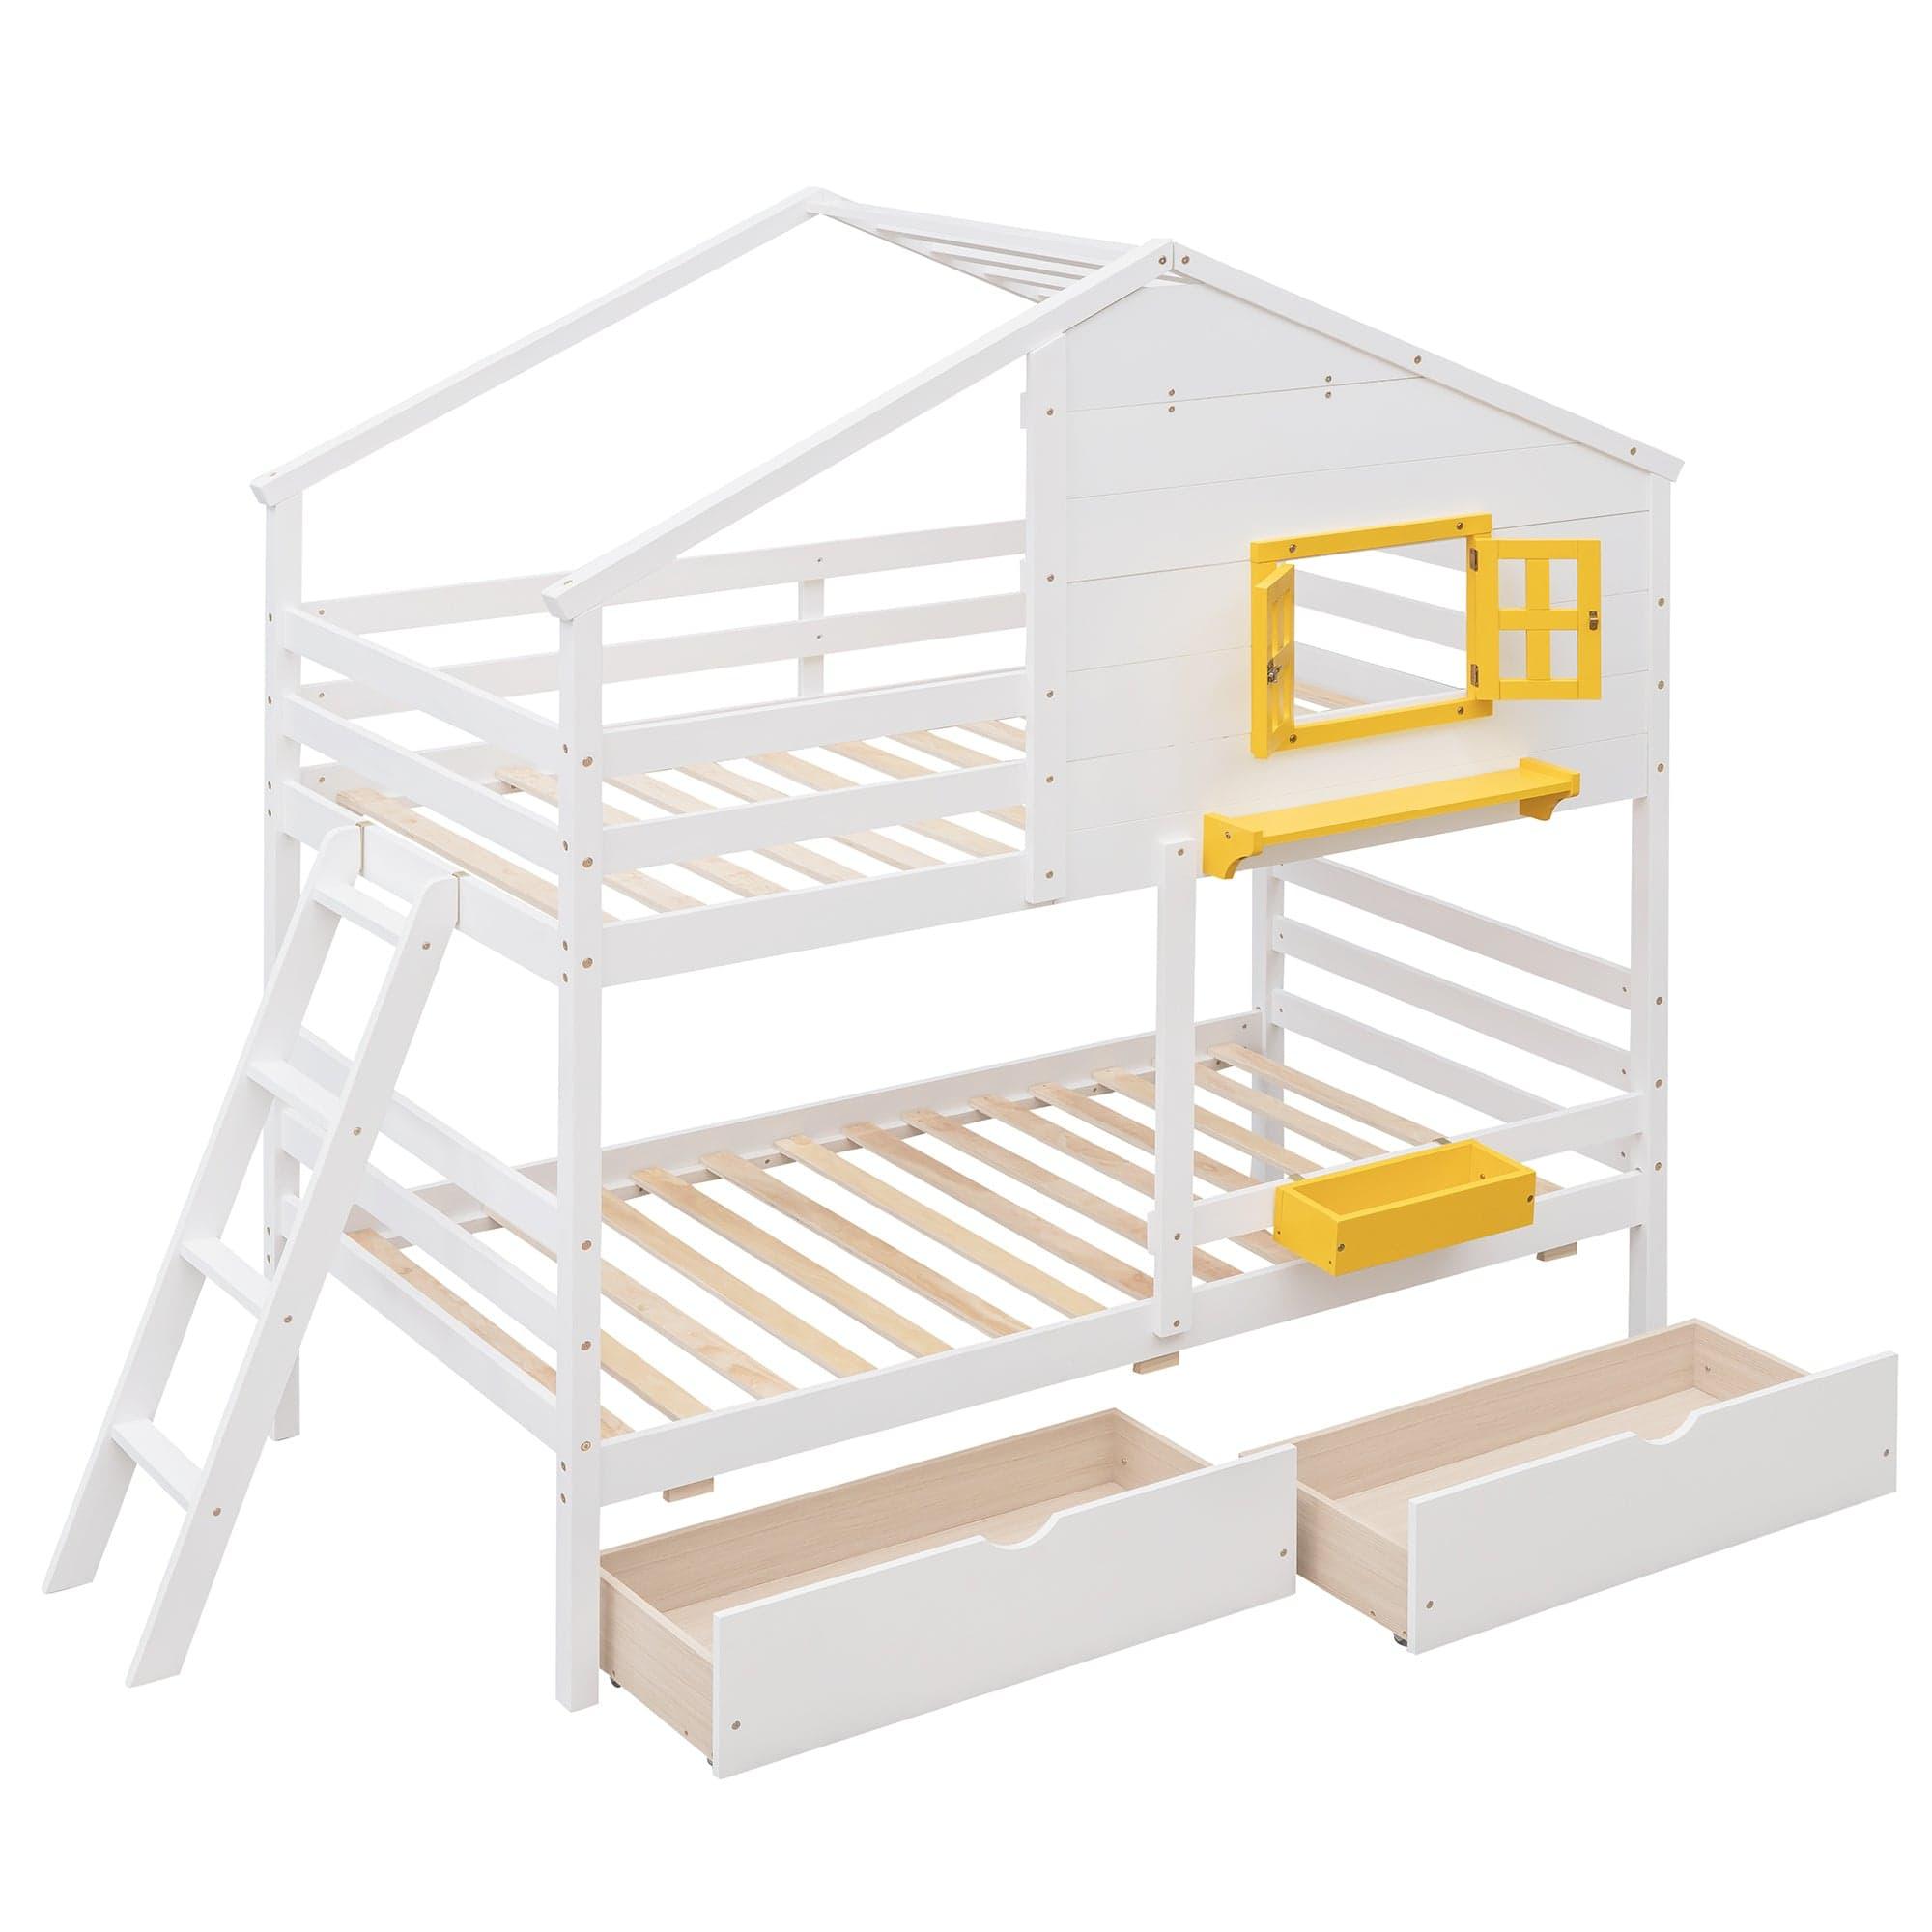 Shop Twin over Twin Bunk Bed with 2 Drawers, 1 Storage Box, 1 Shelf, Window and Roof-White(OLD SKU:LT000608AAK) Mademoiselle Home Decor